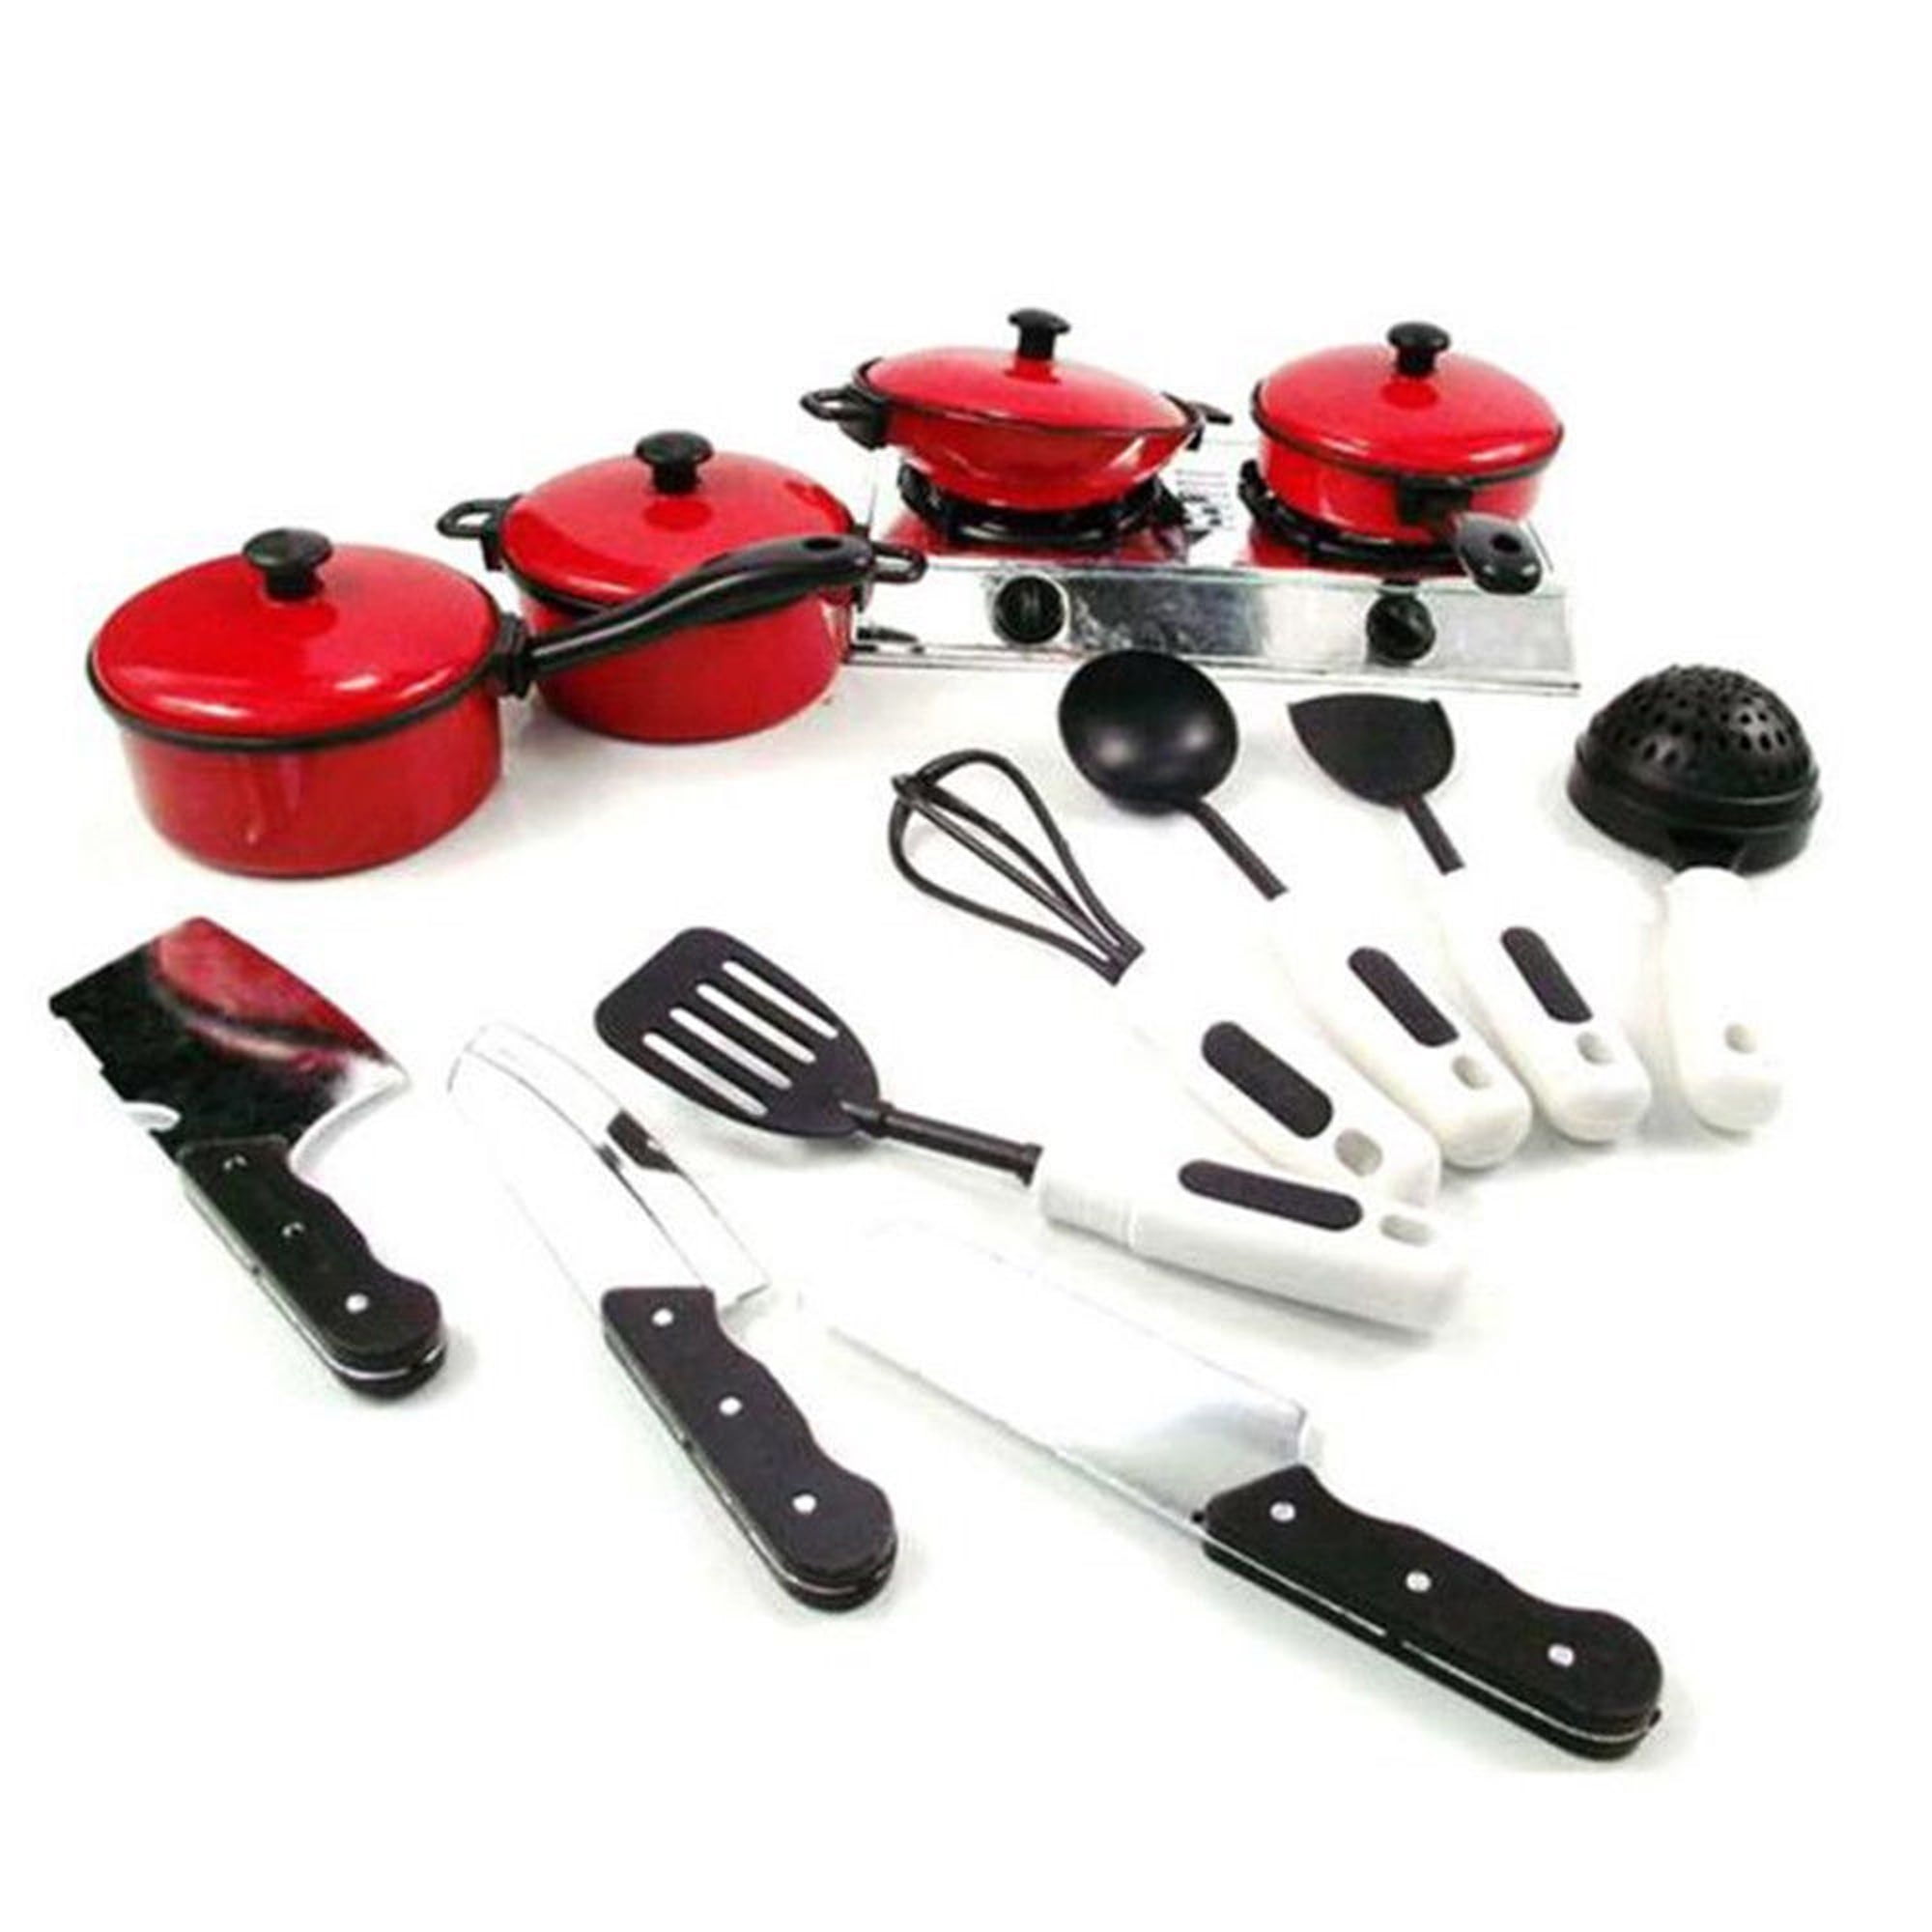 Kid Play House Toy Kitchen Utensils Cooking Pots Pans Food Dishes Cookware 13PCS 